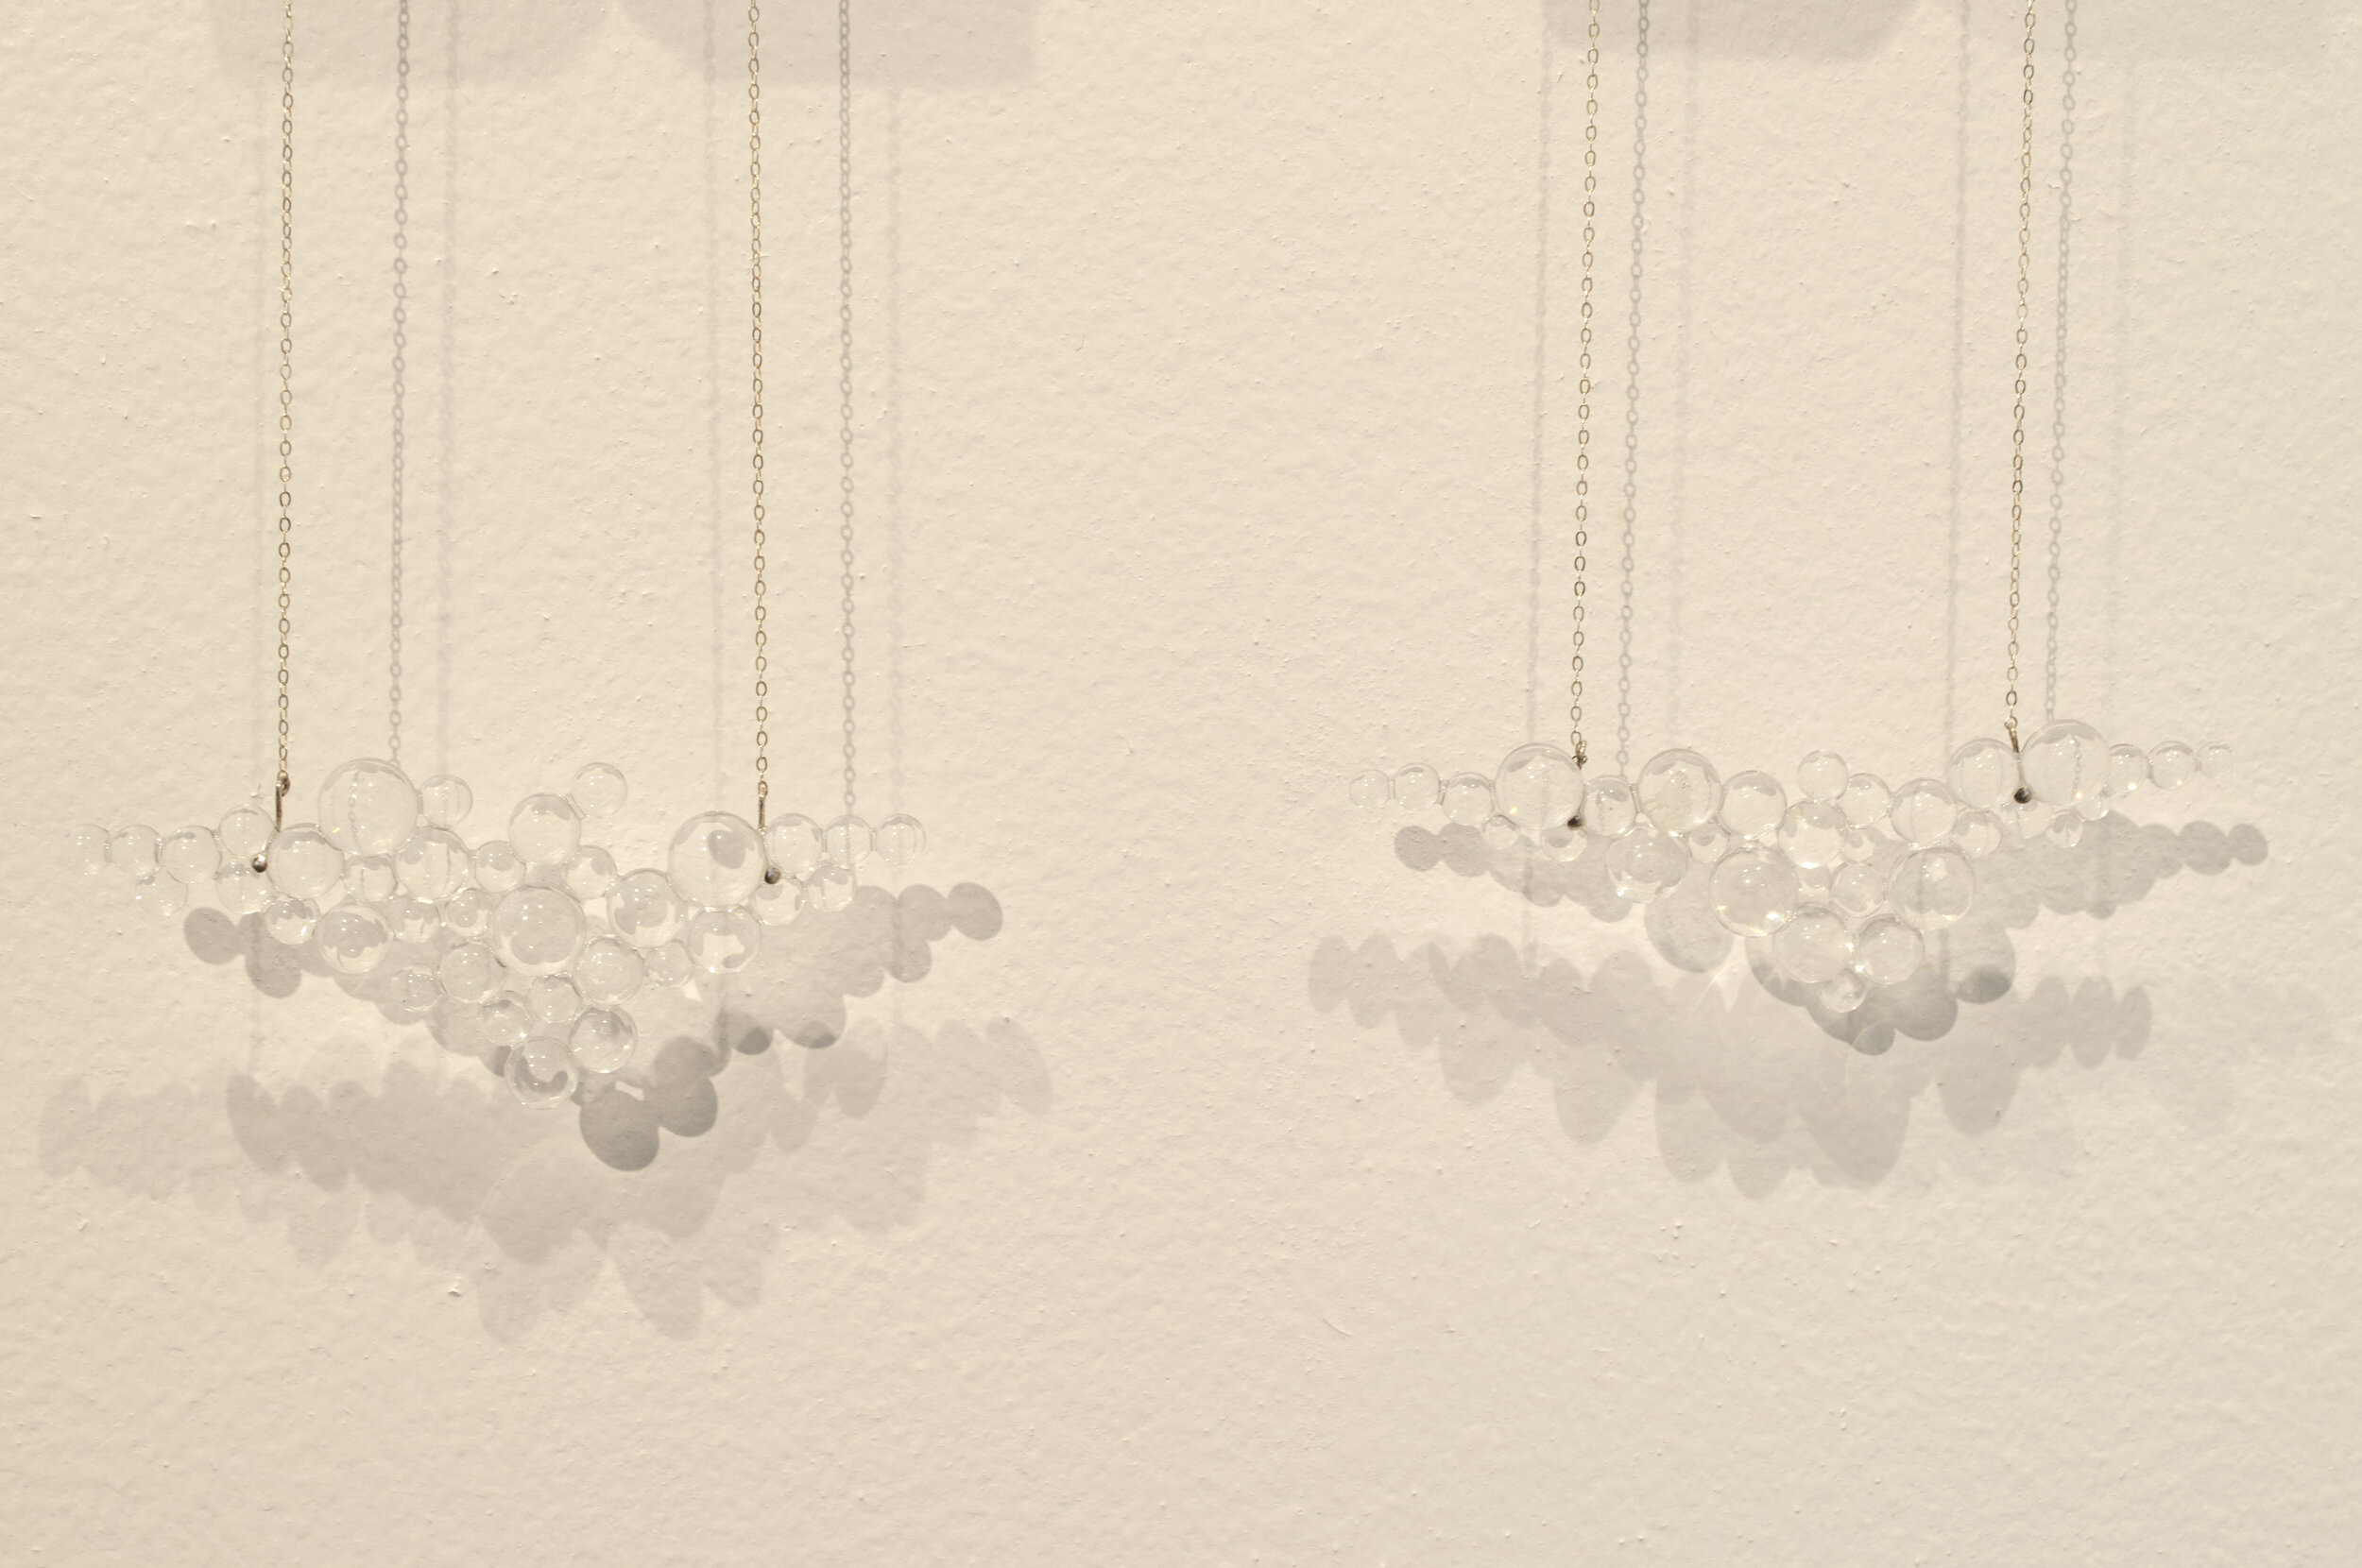 Clear Droplet Necklaces by Abegael Uffelman